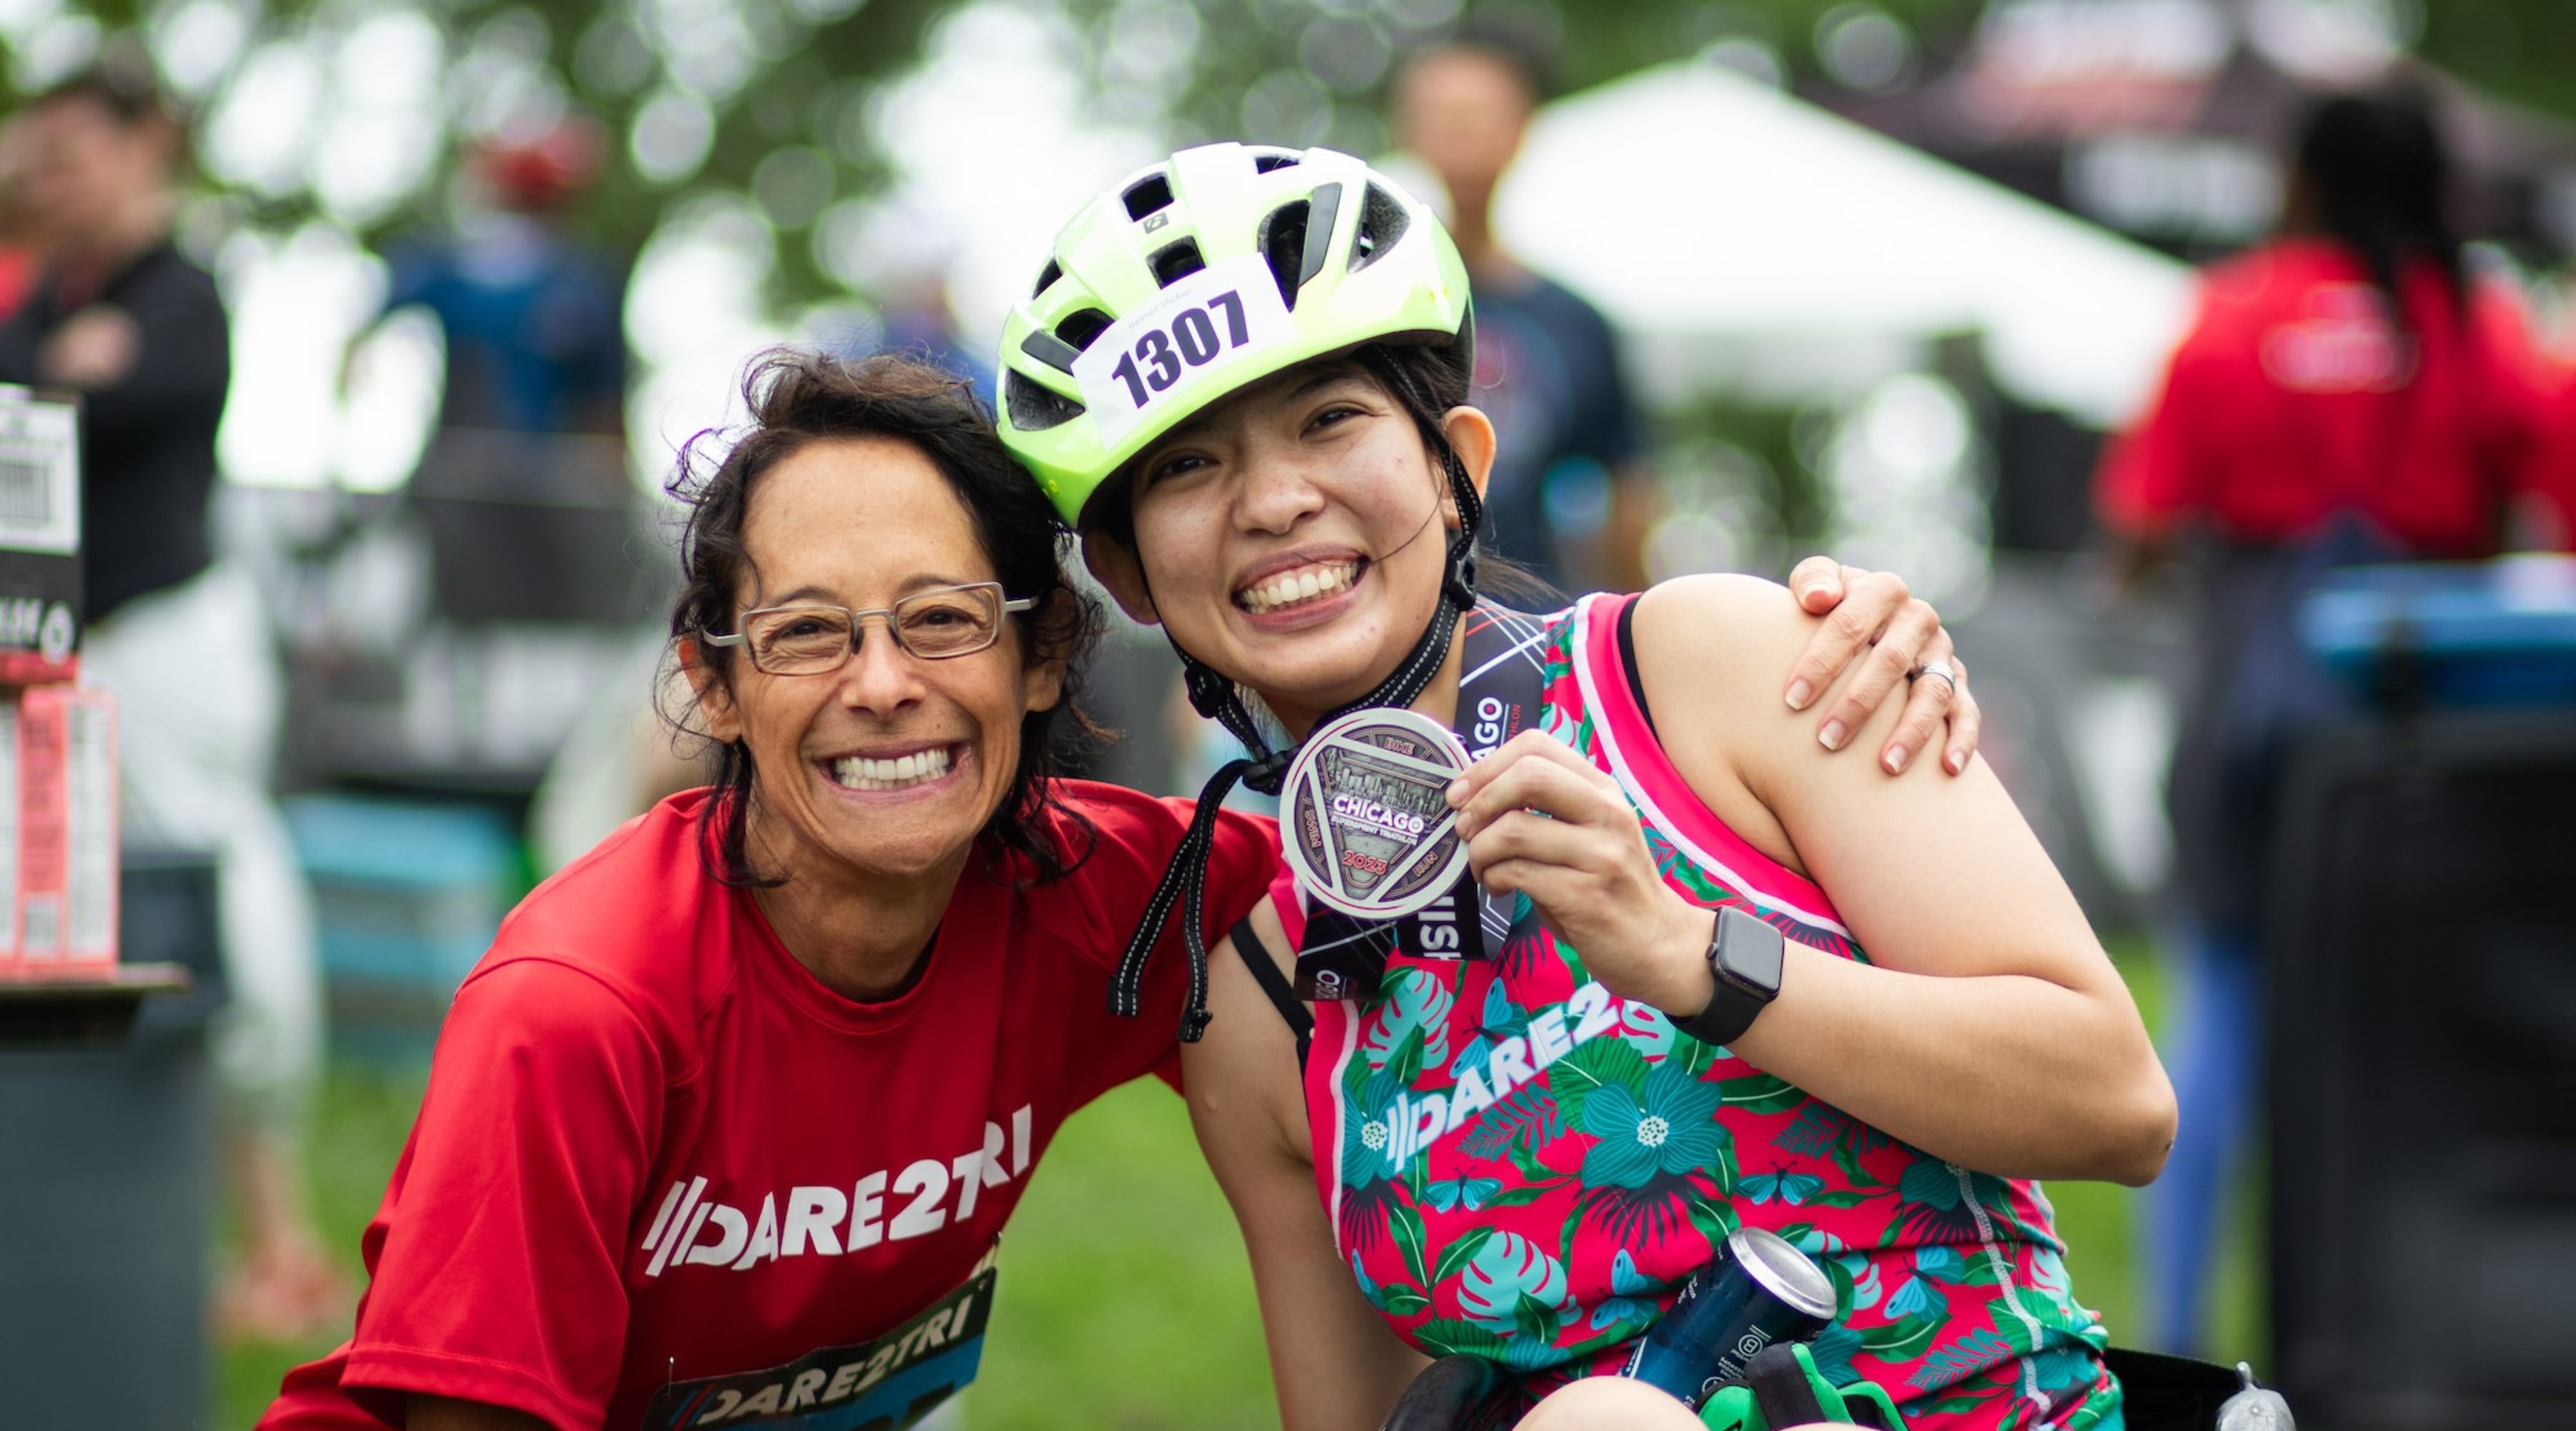 An athlete wearing a helmet with a racing number on it and sitting in a racing wheelchair smiles and holds up a medal. A woman with a bib that says guide crouches down and has her arm around the athlete.